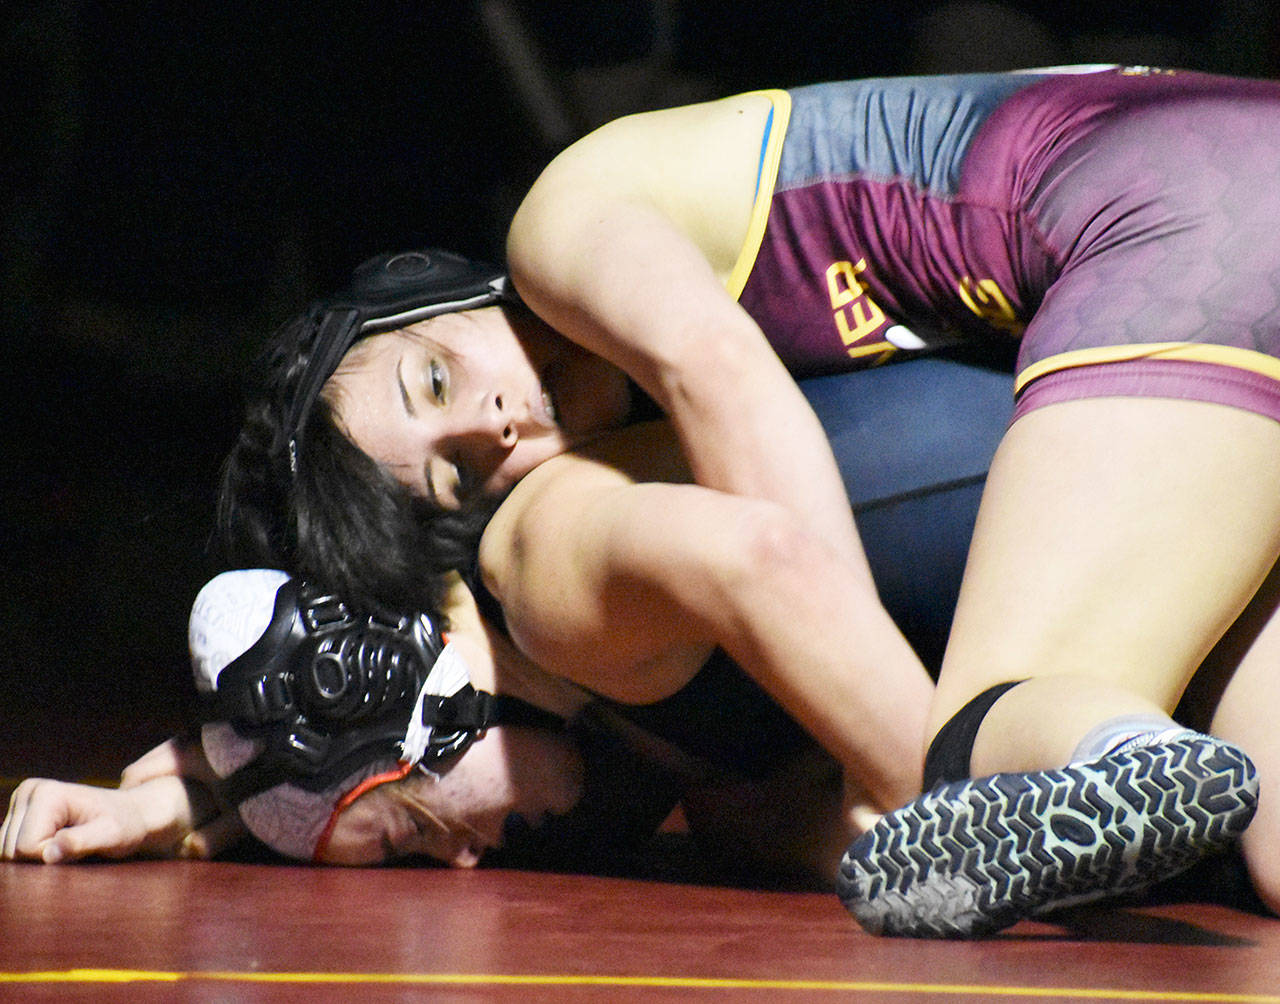 The White River High girls hosted a night of wrestling Jan. 10, bringing together athletes from several schools while also highlighting a few youth wrestlers from the Buckley area. Pictured is Alex Hernandez. Photo by Kevin Hanson